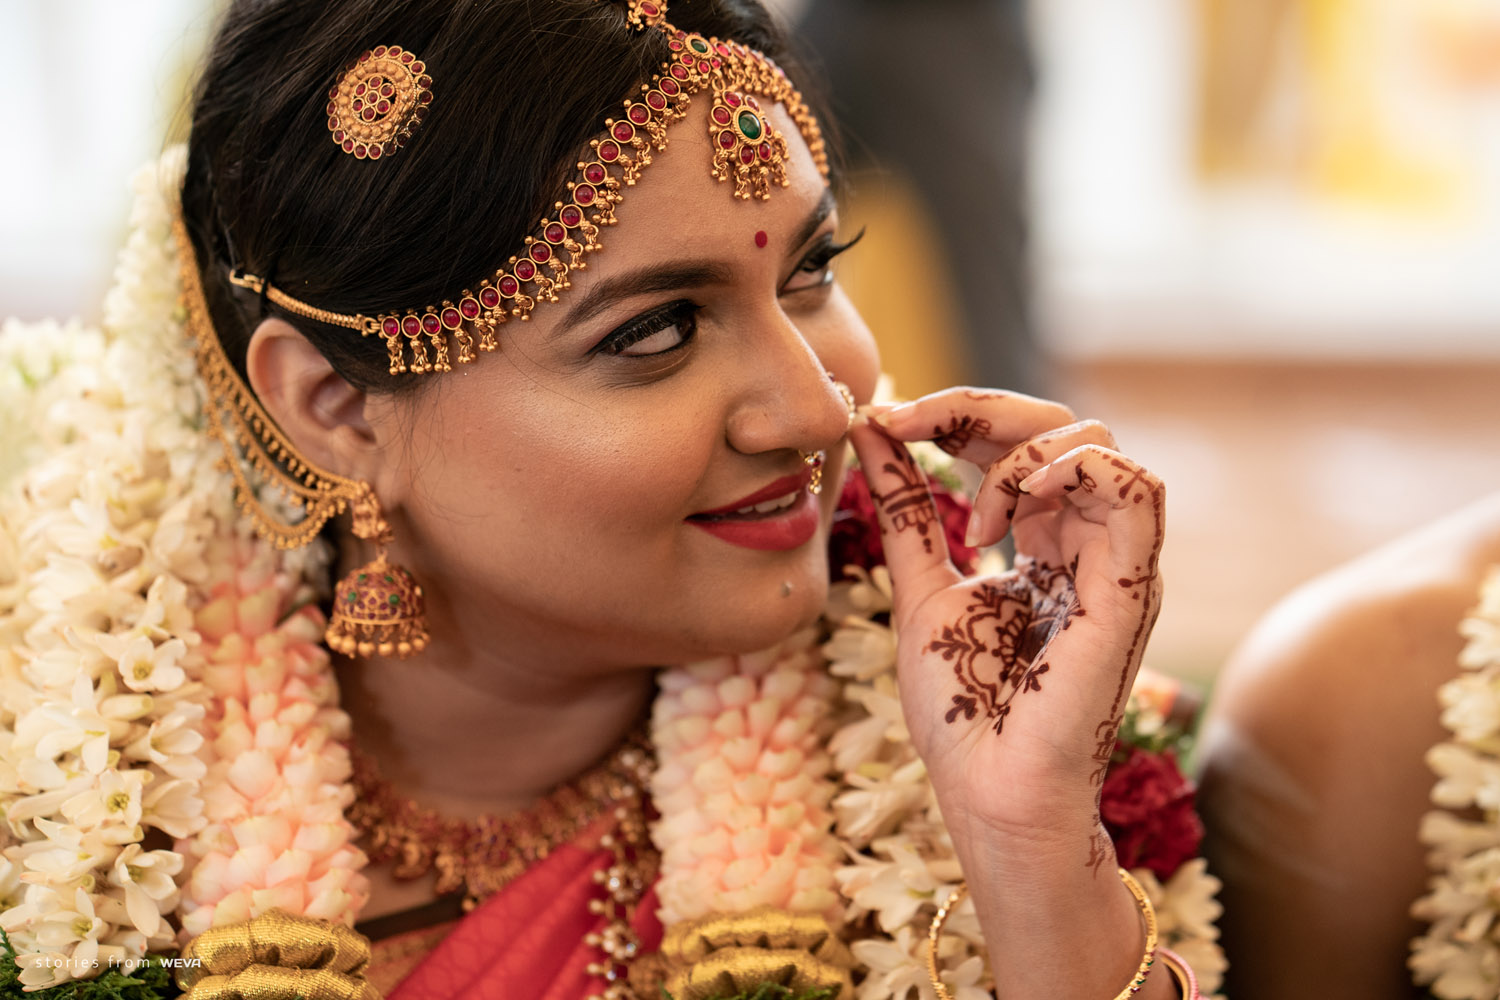 The Candid Wedding Shoot: Capturing the Heart & Soul of Your Special Day